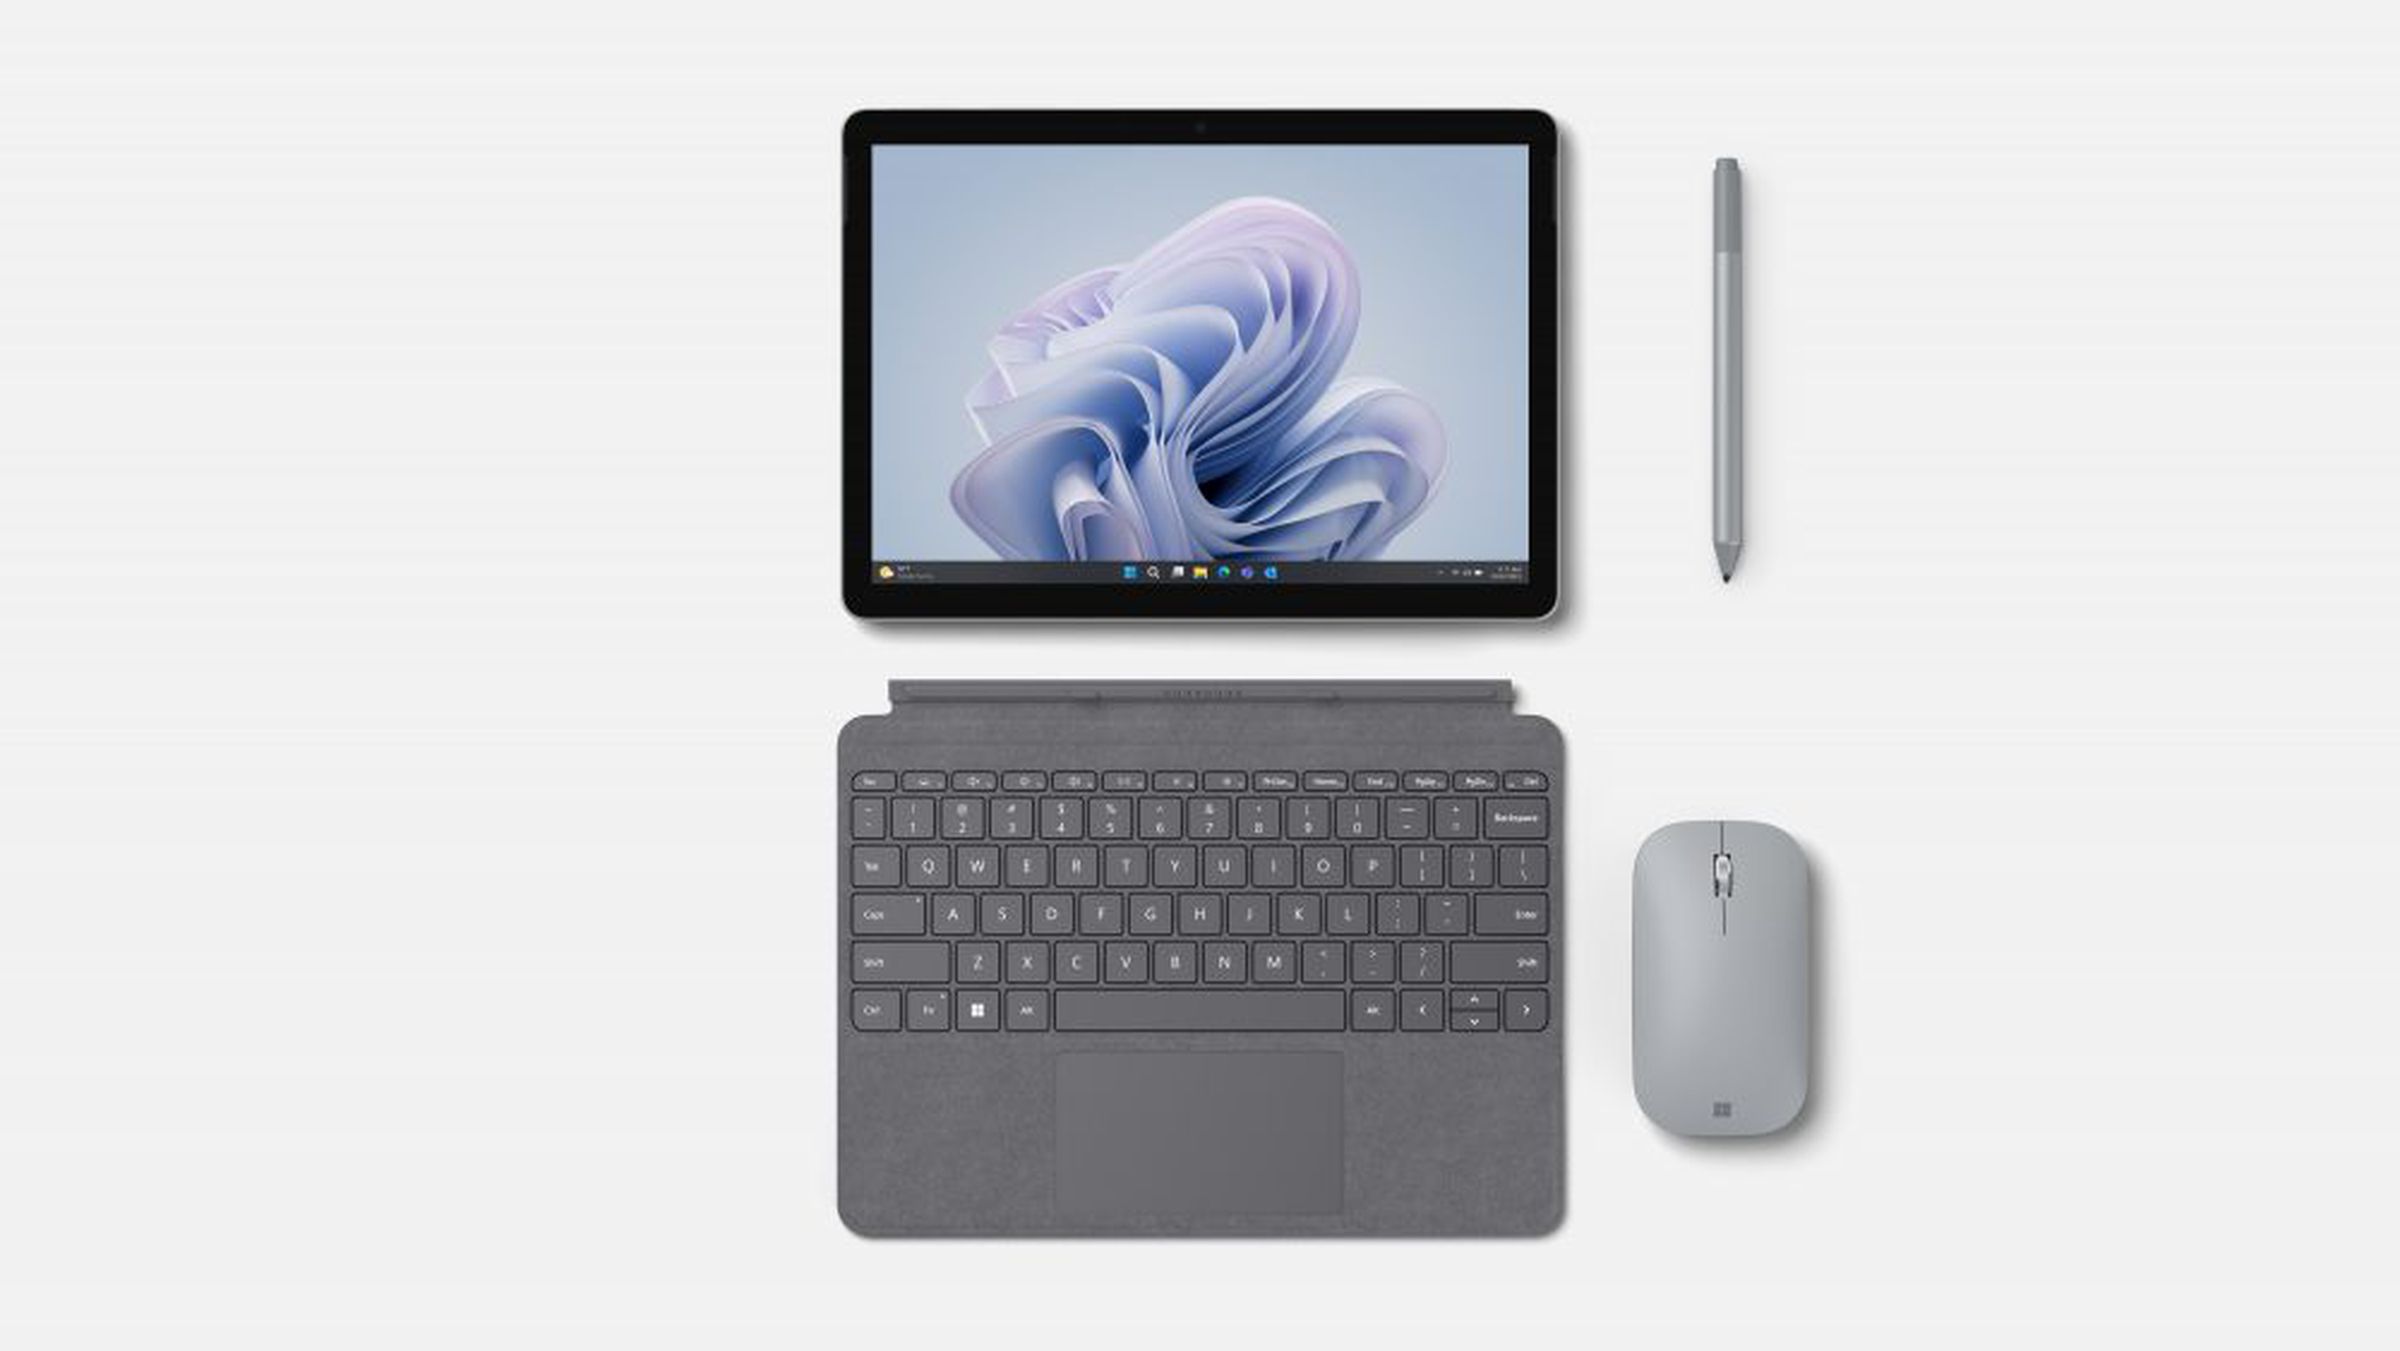 The Microsoft Surface Go 4 alongside its type cover, and Microsoft accessories.